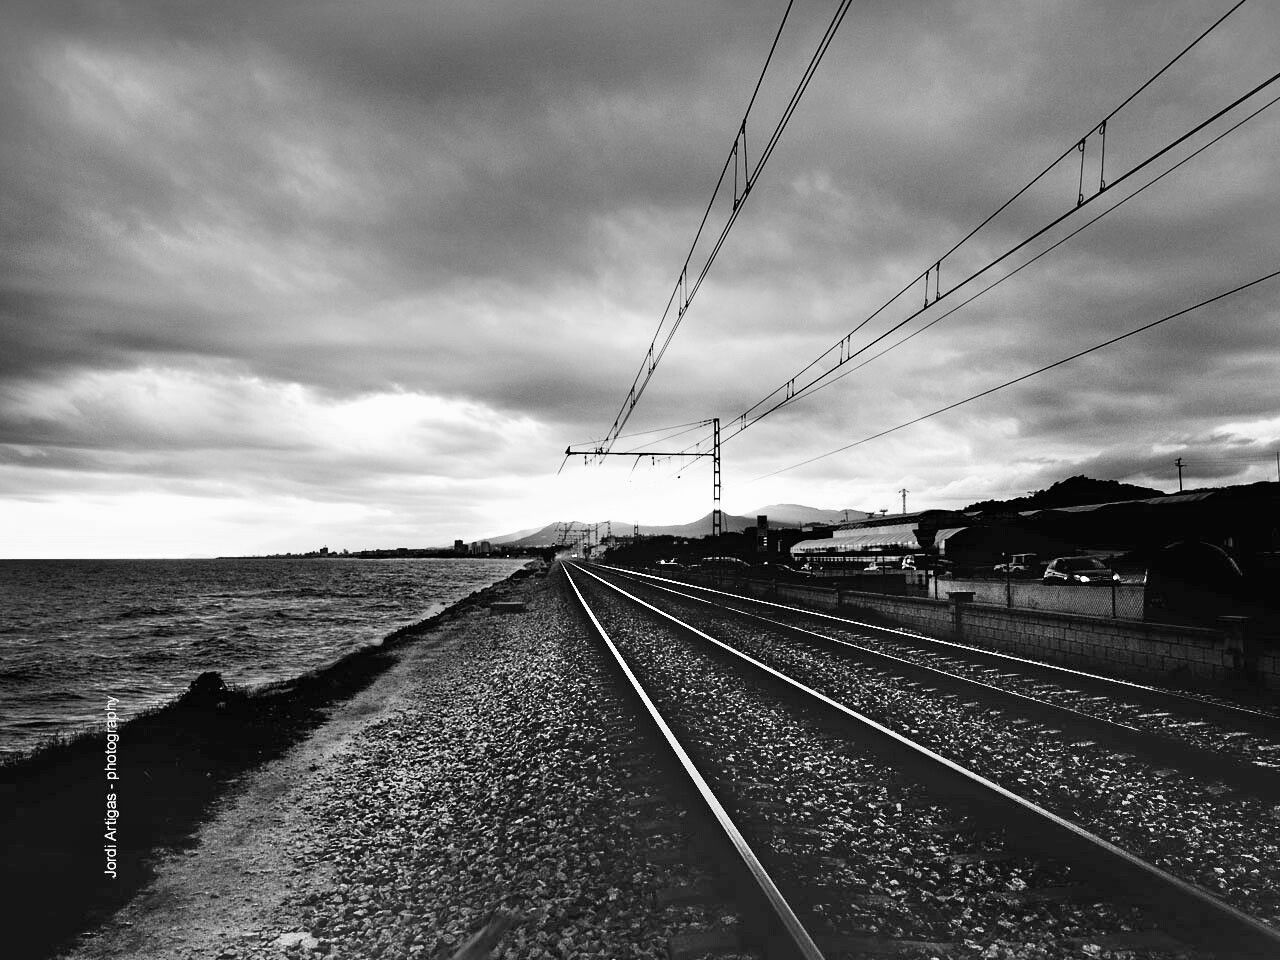 sky, cloud - sky, railroad track, transportation, water, the way forward, cloudy, rail transportation, diminishing perspective, cloud, built structure, vanishing point, architecture, connection, sea, overcast, public transportation, travel, day, outdoors